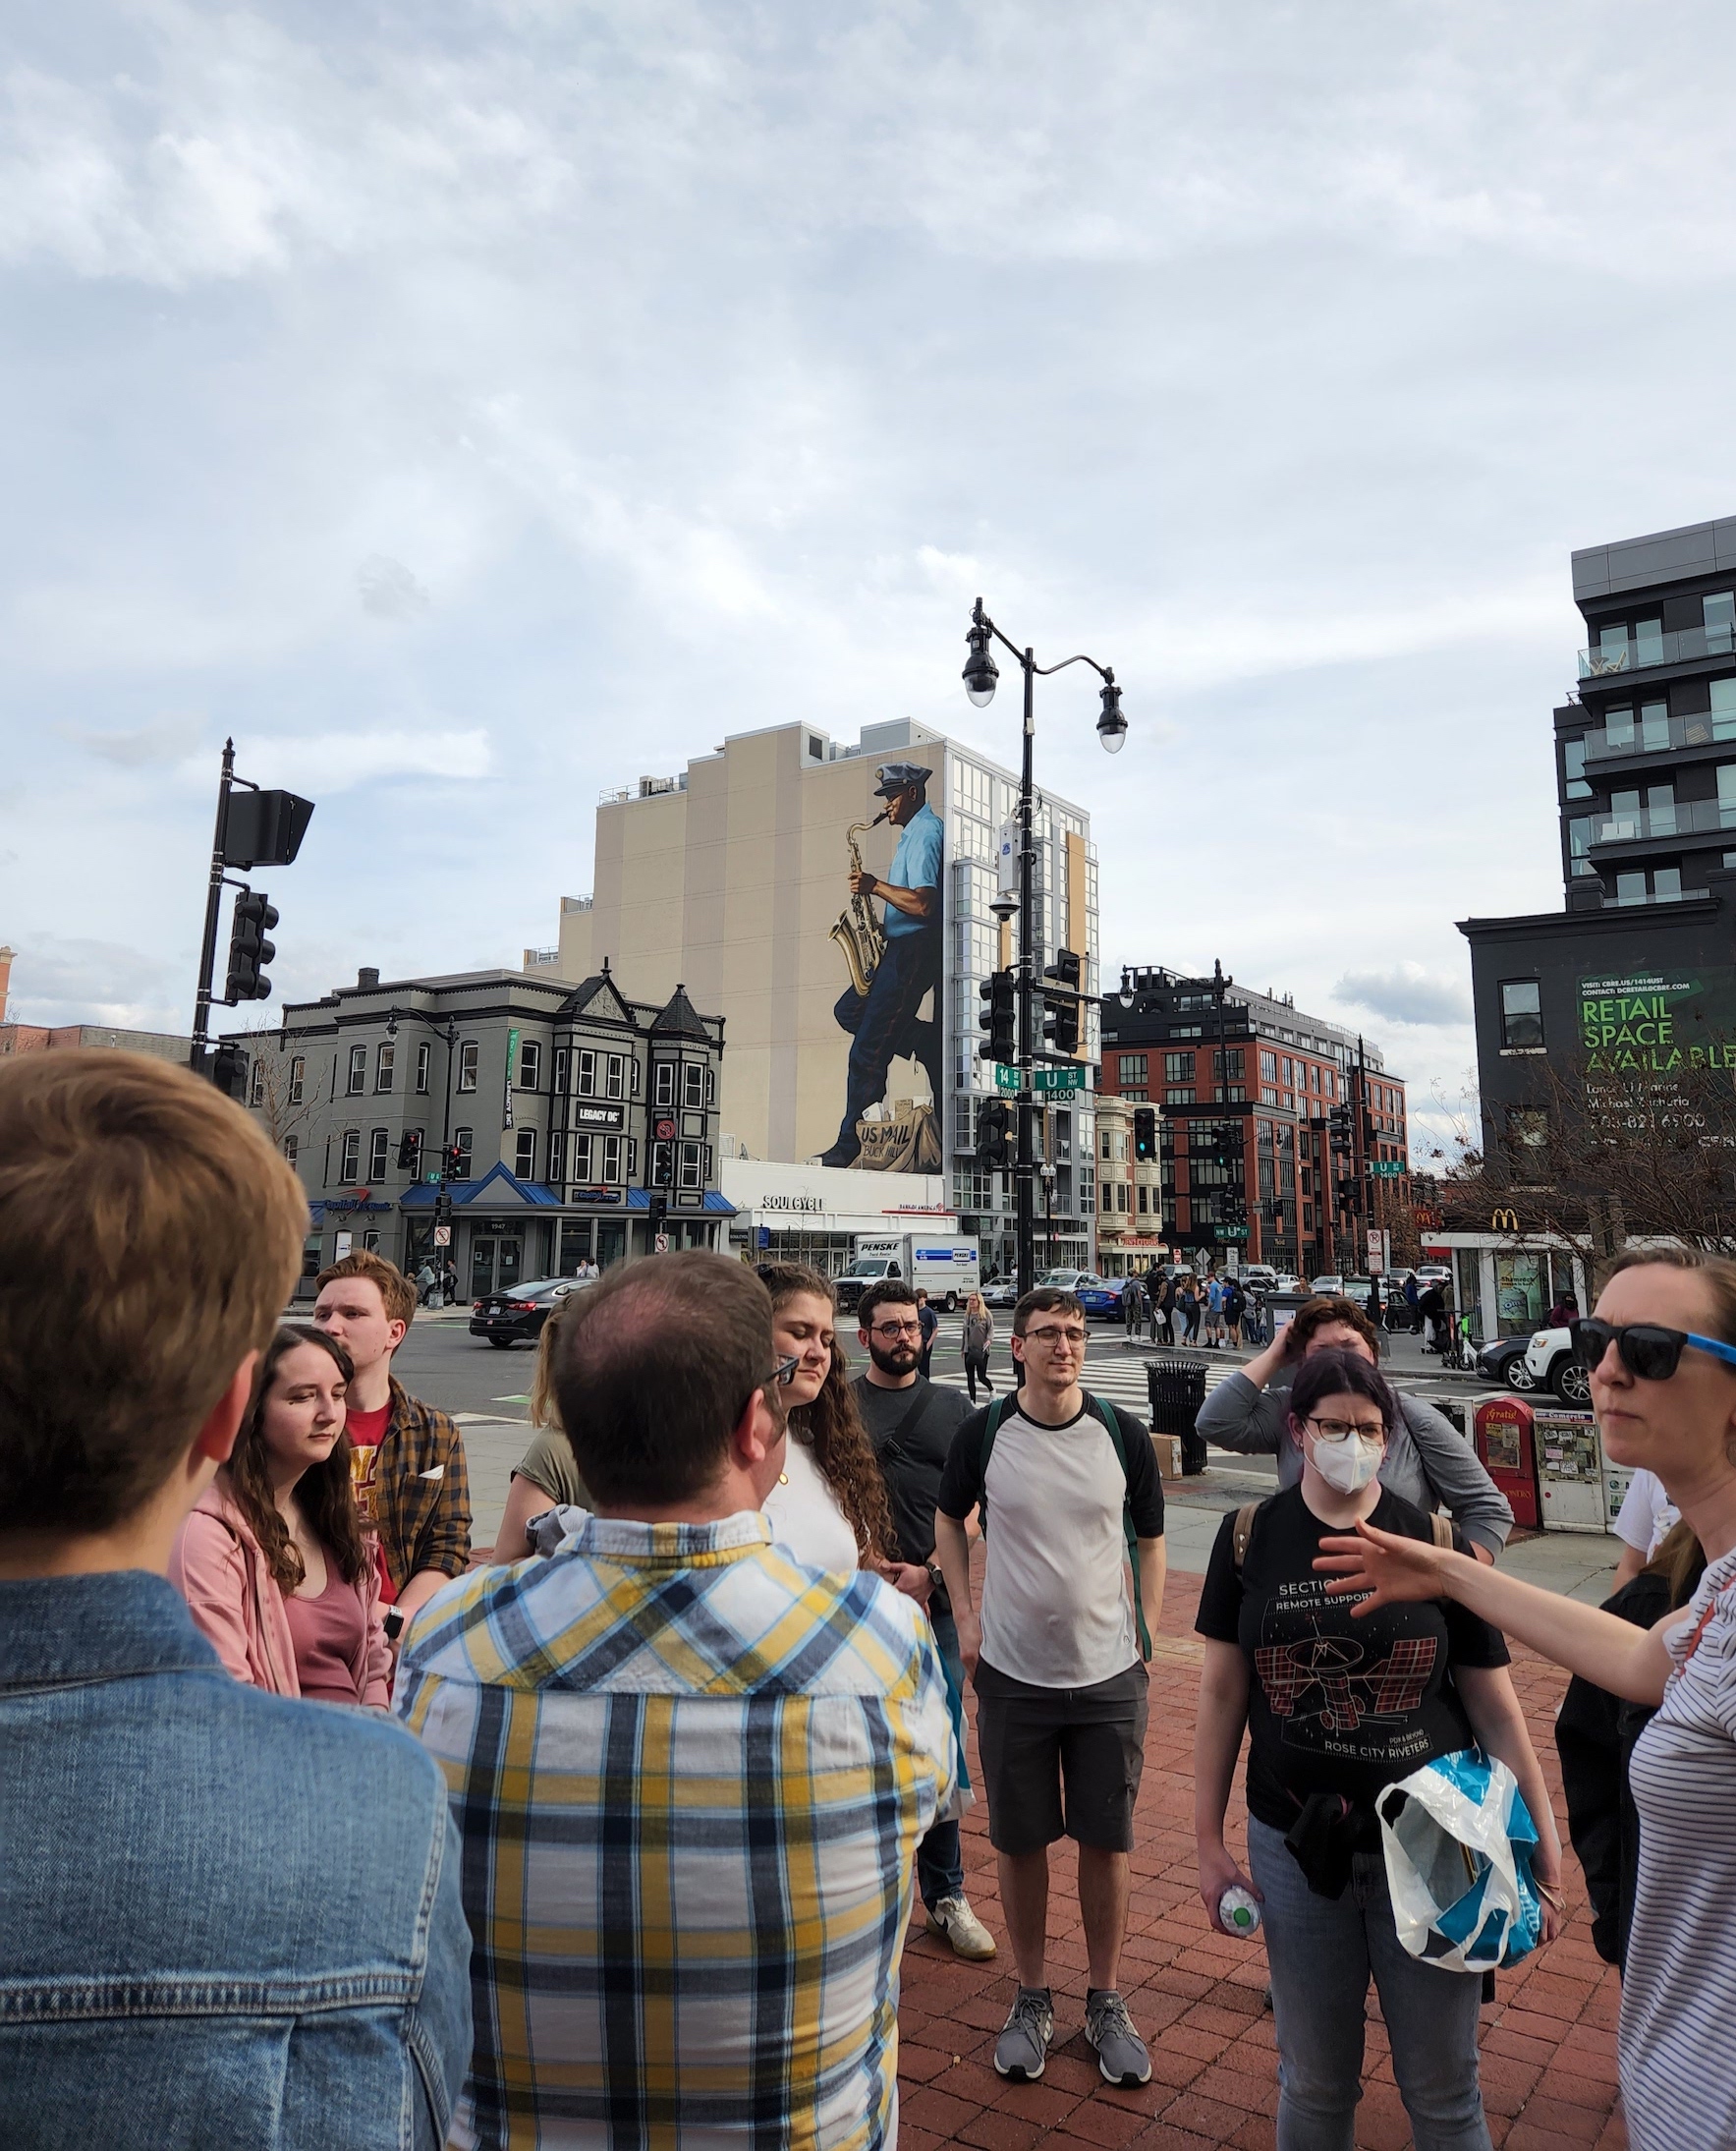 Students participated in a walking tour of U-Street, a historic Black neighborhood in Washington, D.C. Pictured in the background is the city